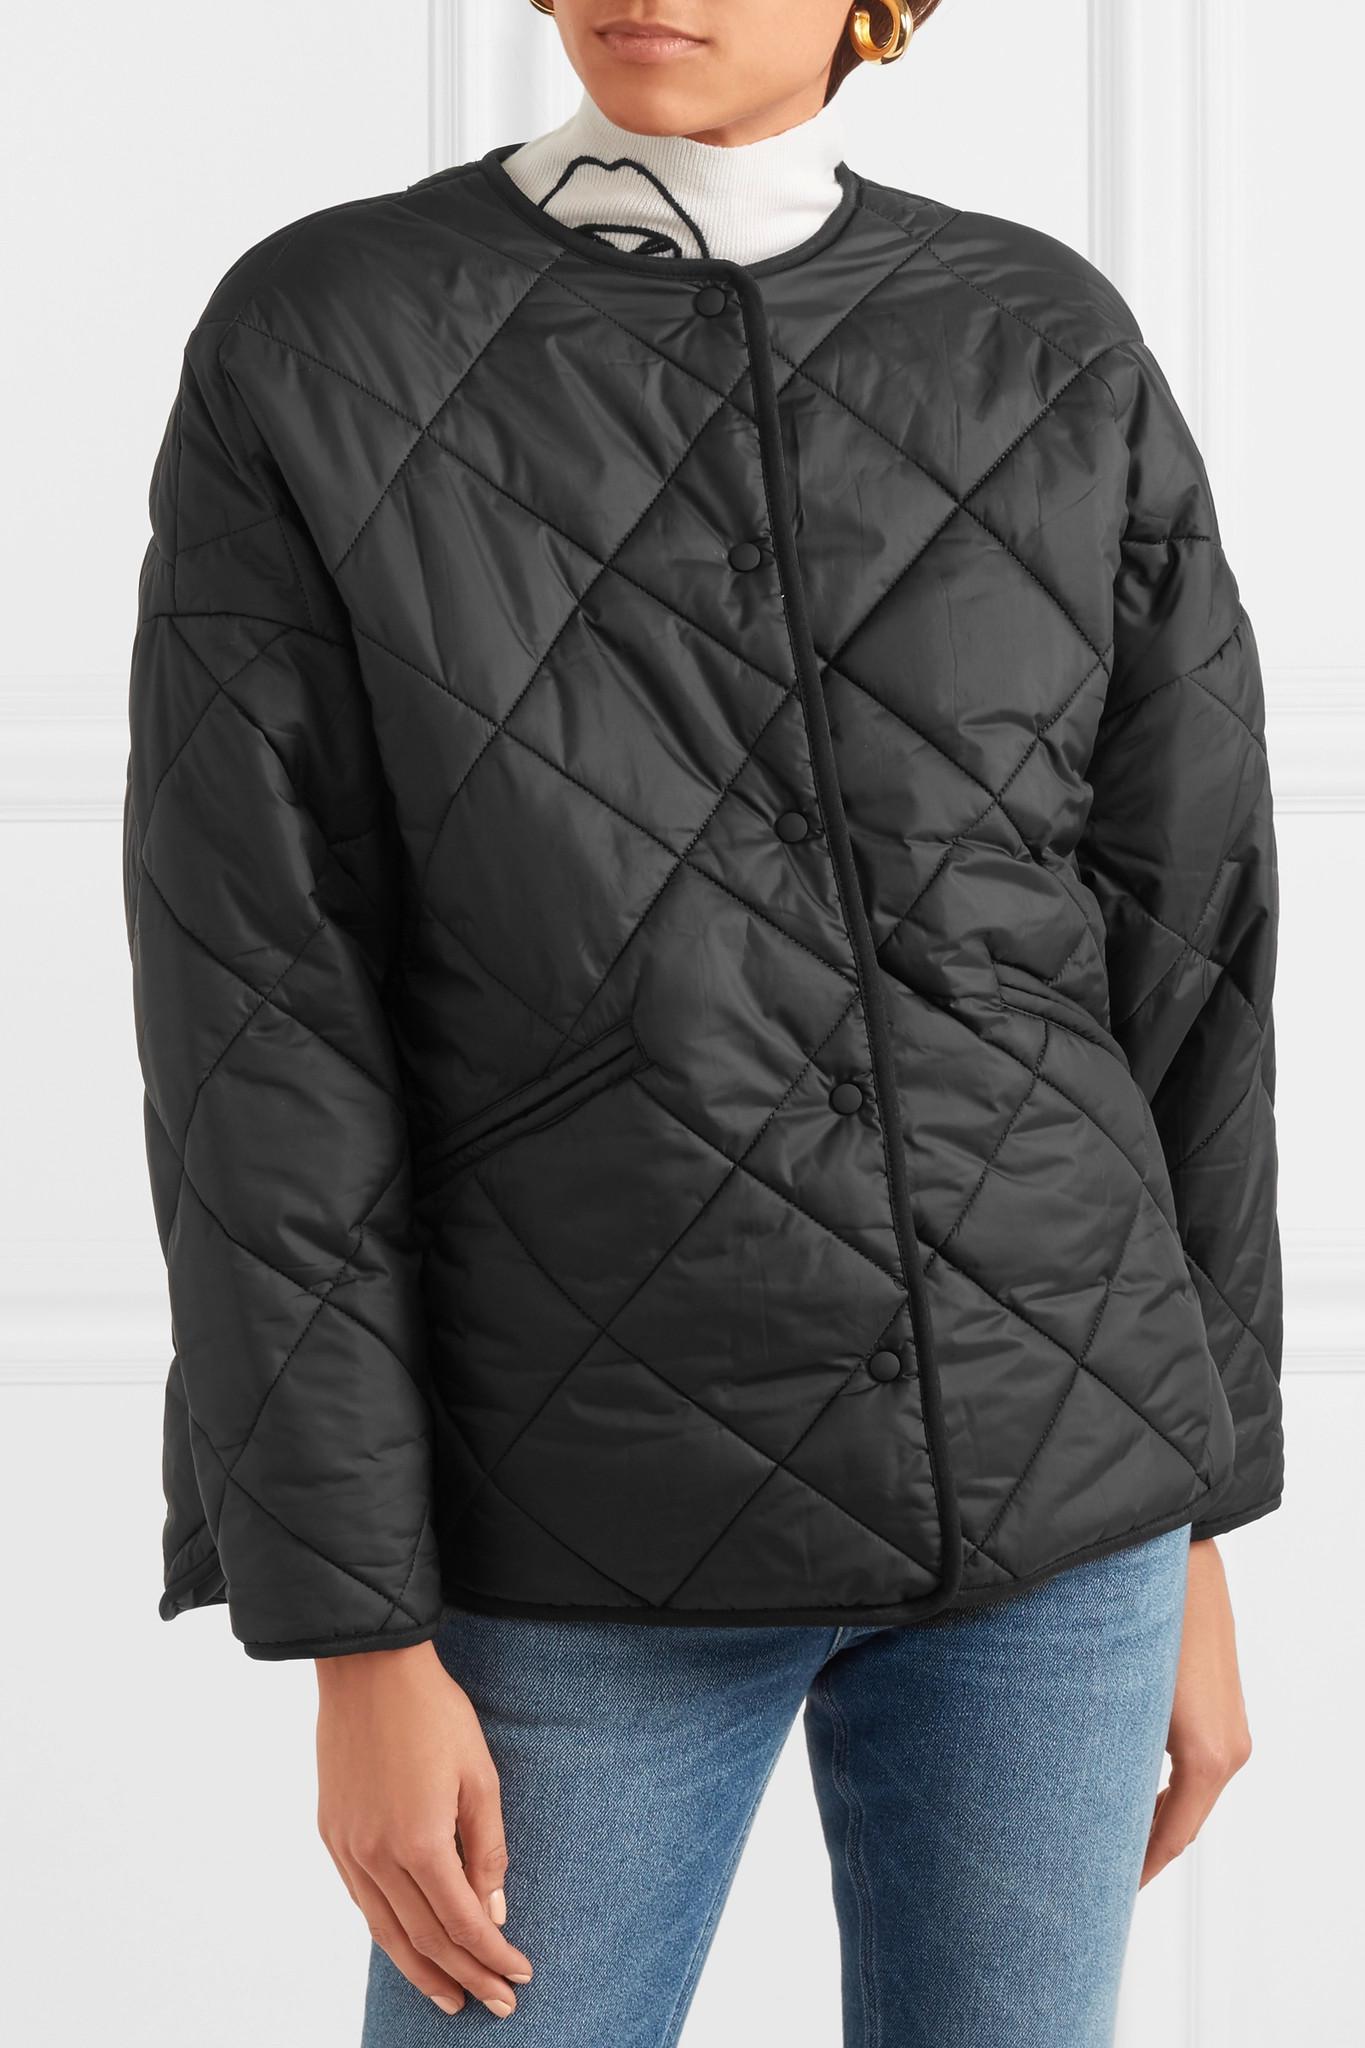 Totême Dublin Quilted Shell Jacket in Black - Lyst